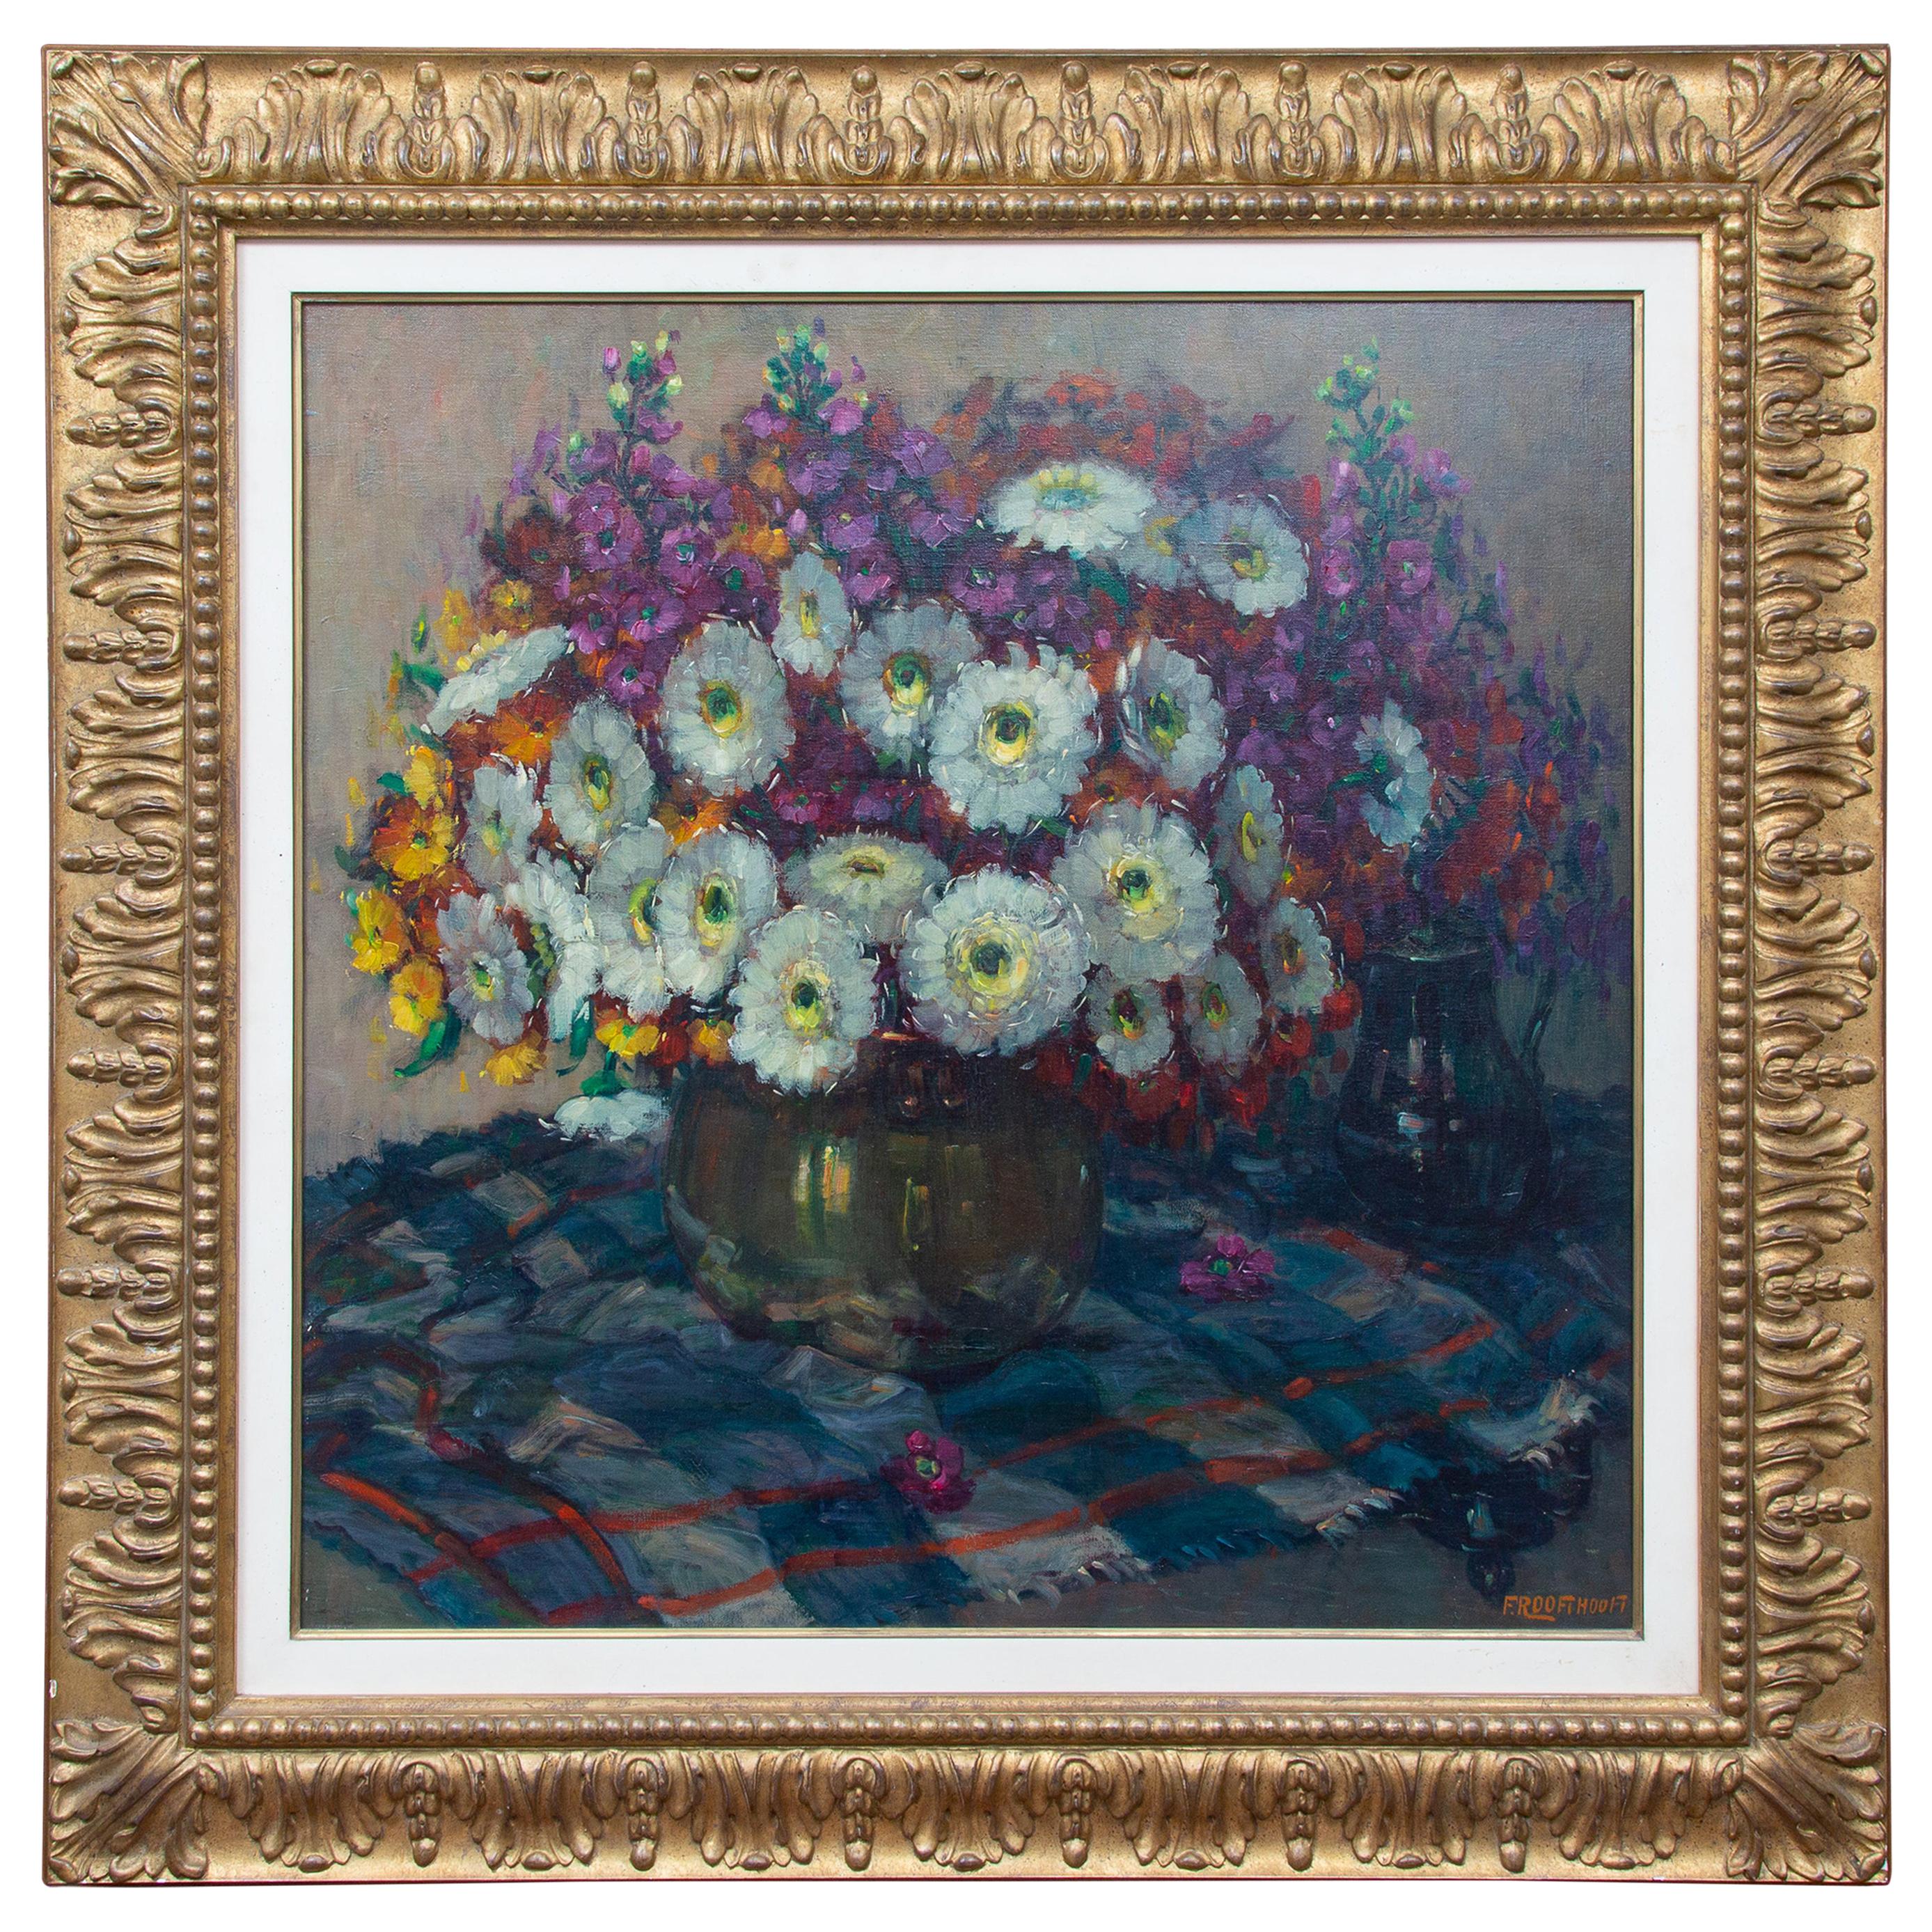 Floral Still Life by Frans Roofthooft, 'Belgian'